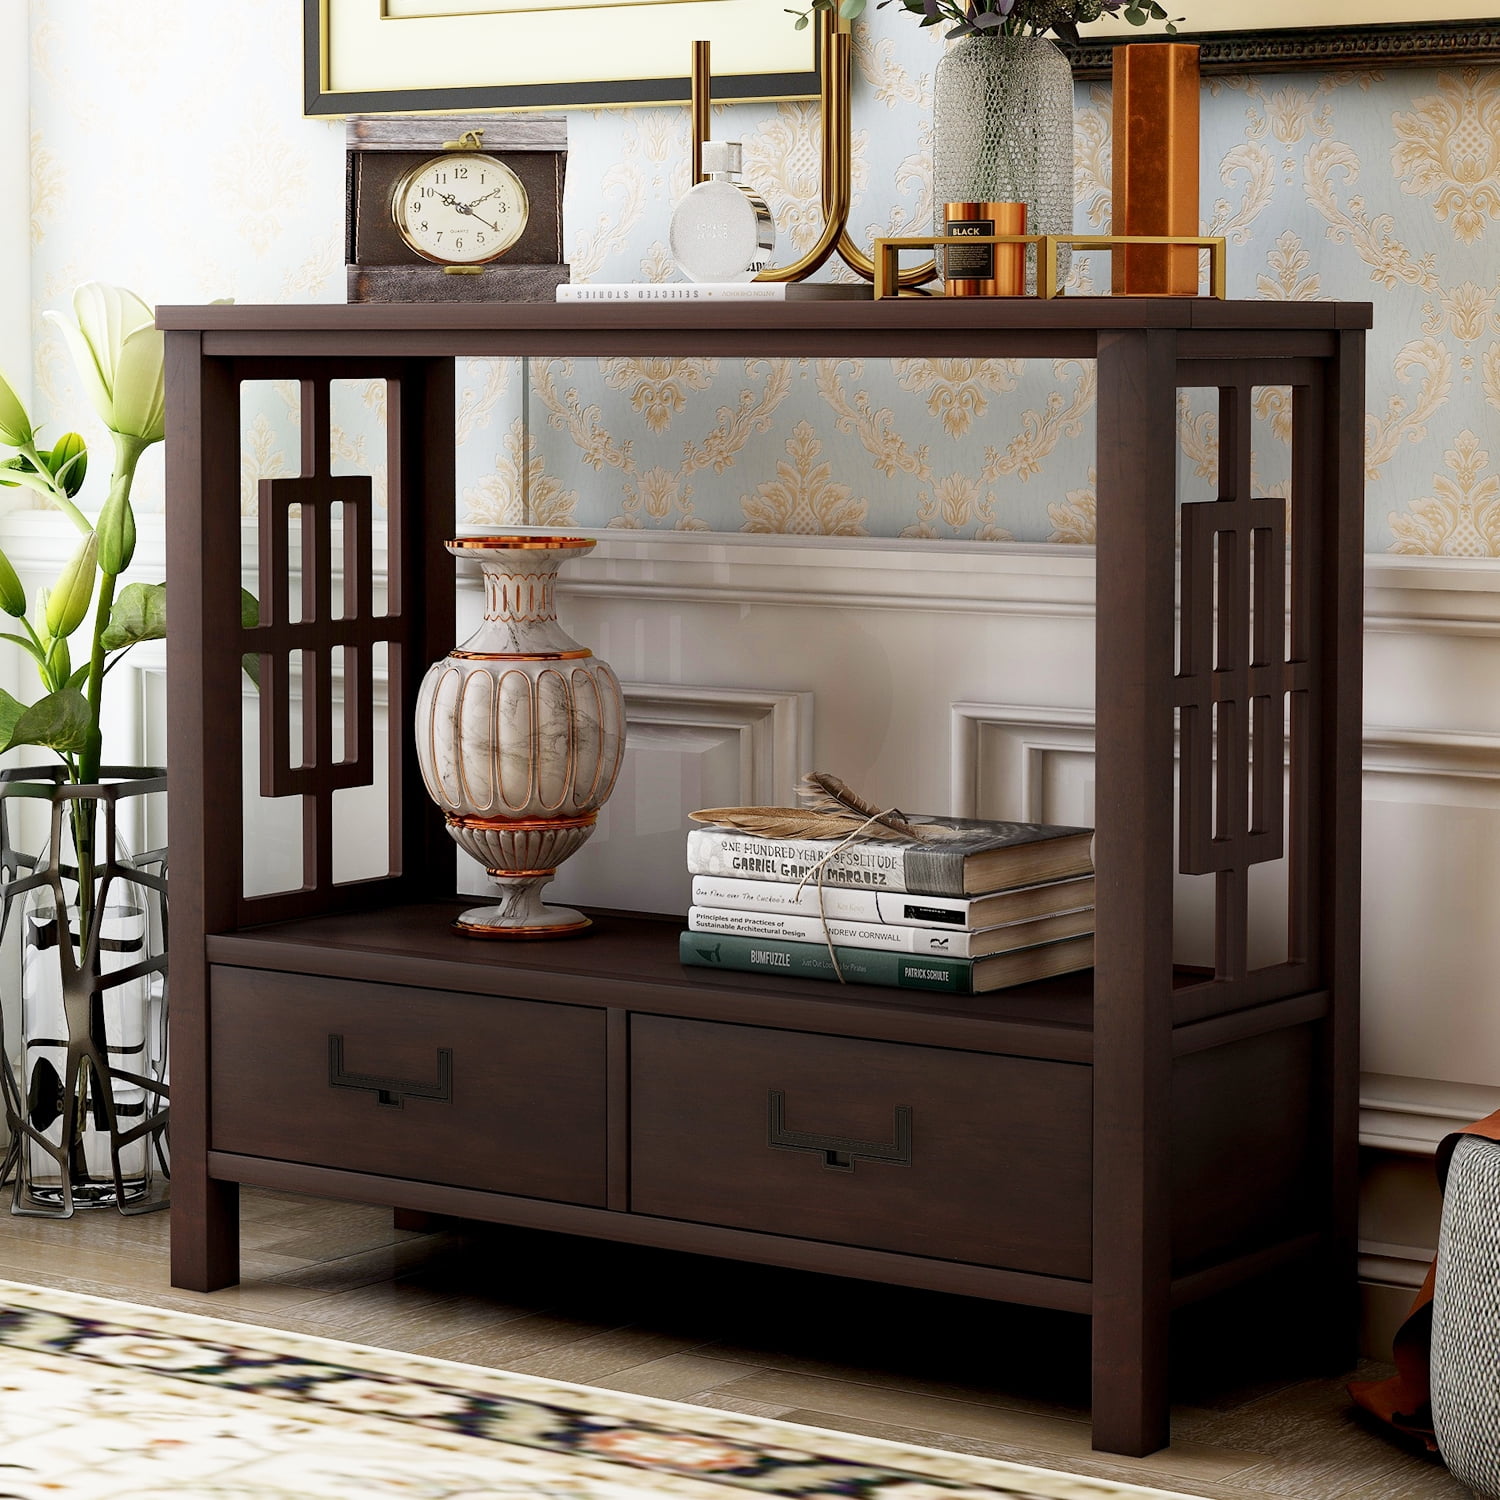 Console Table with Drawers, BTMWAY Wooden Rustic Narrow Entryway Foyer